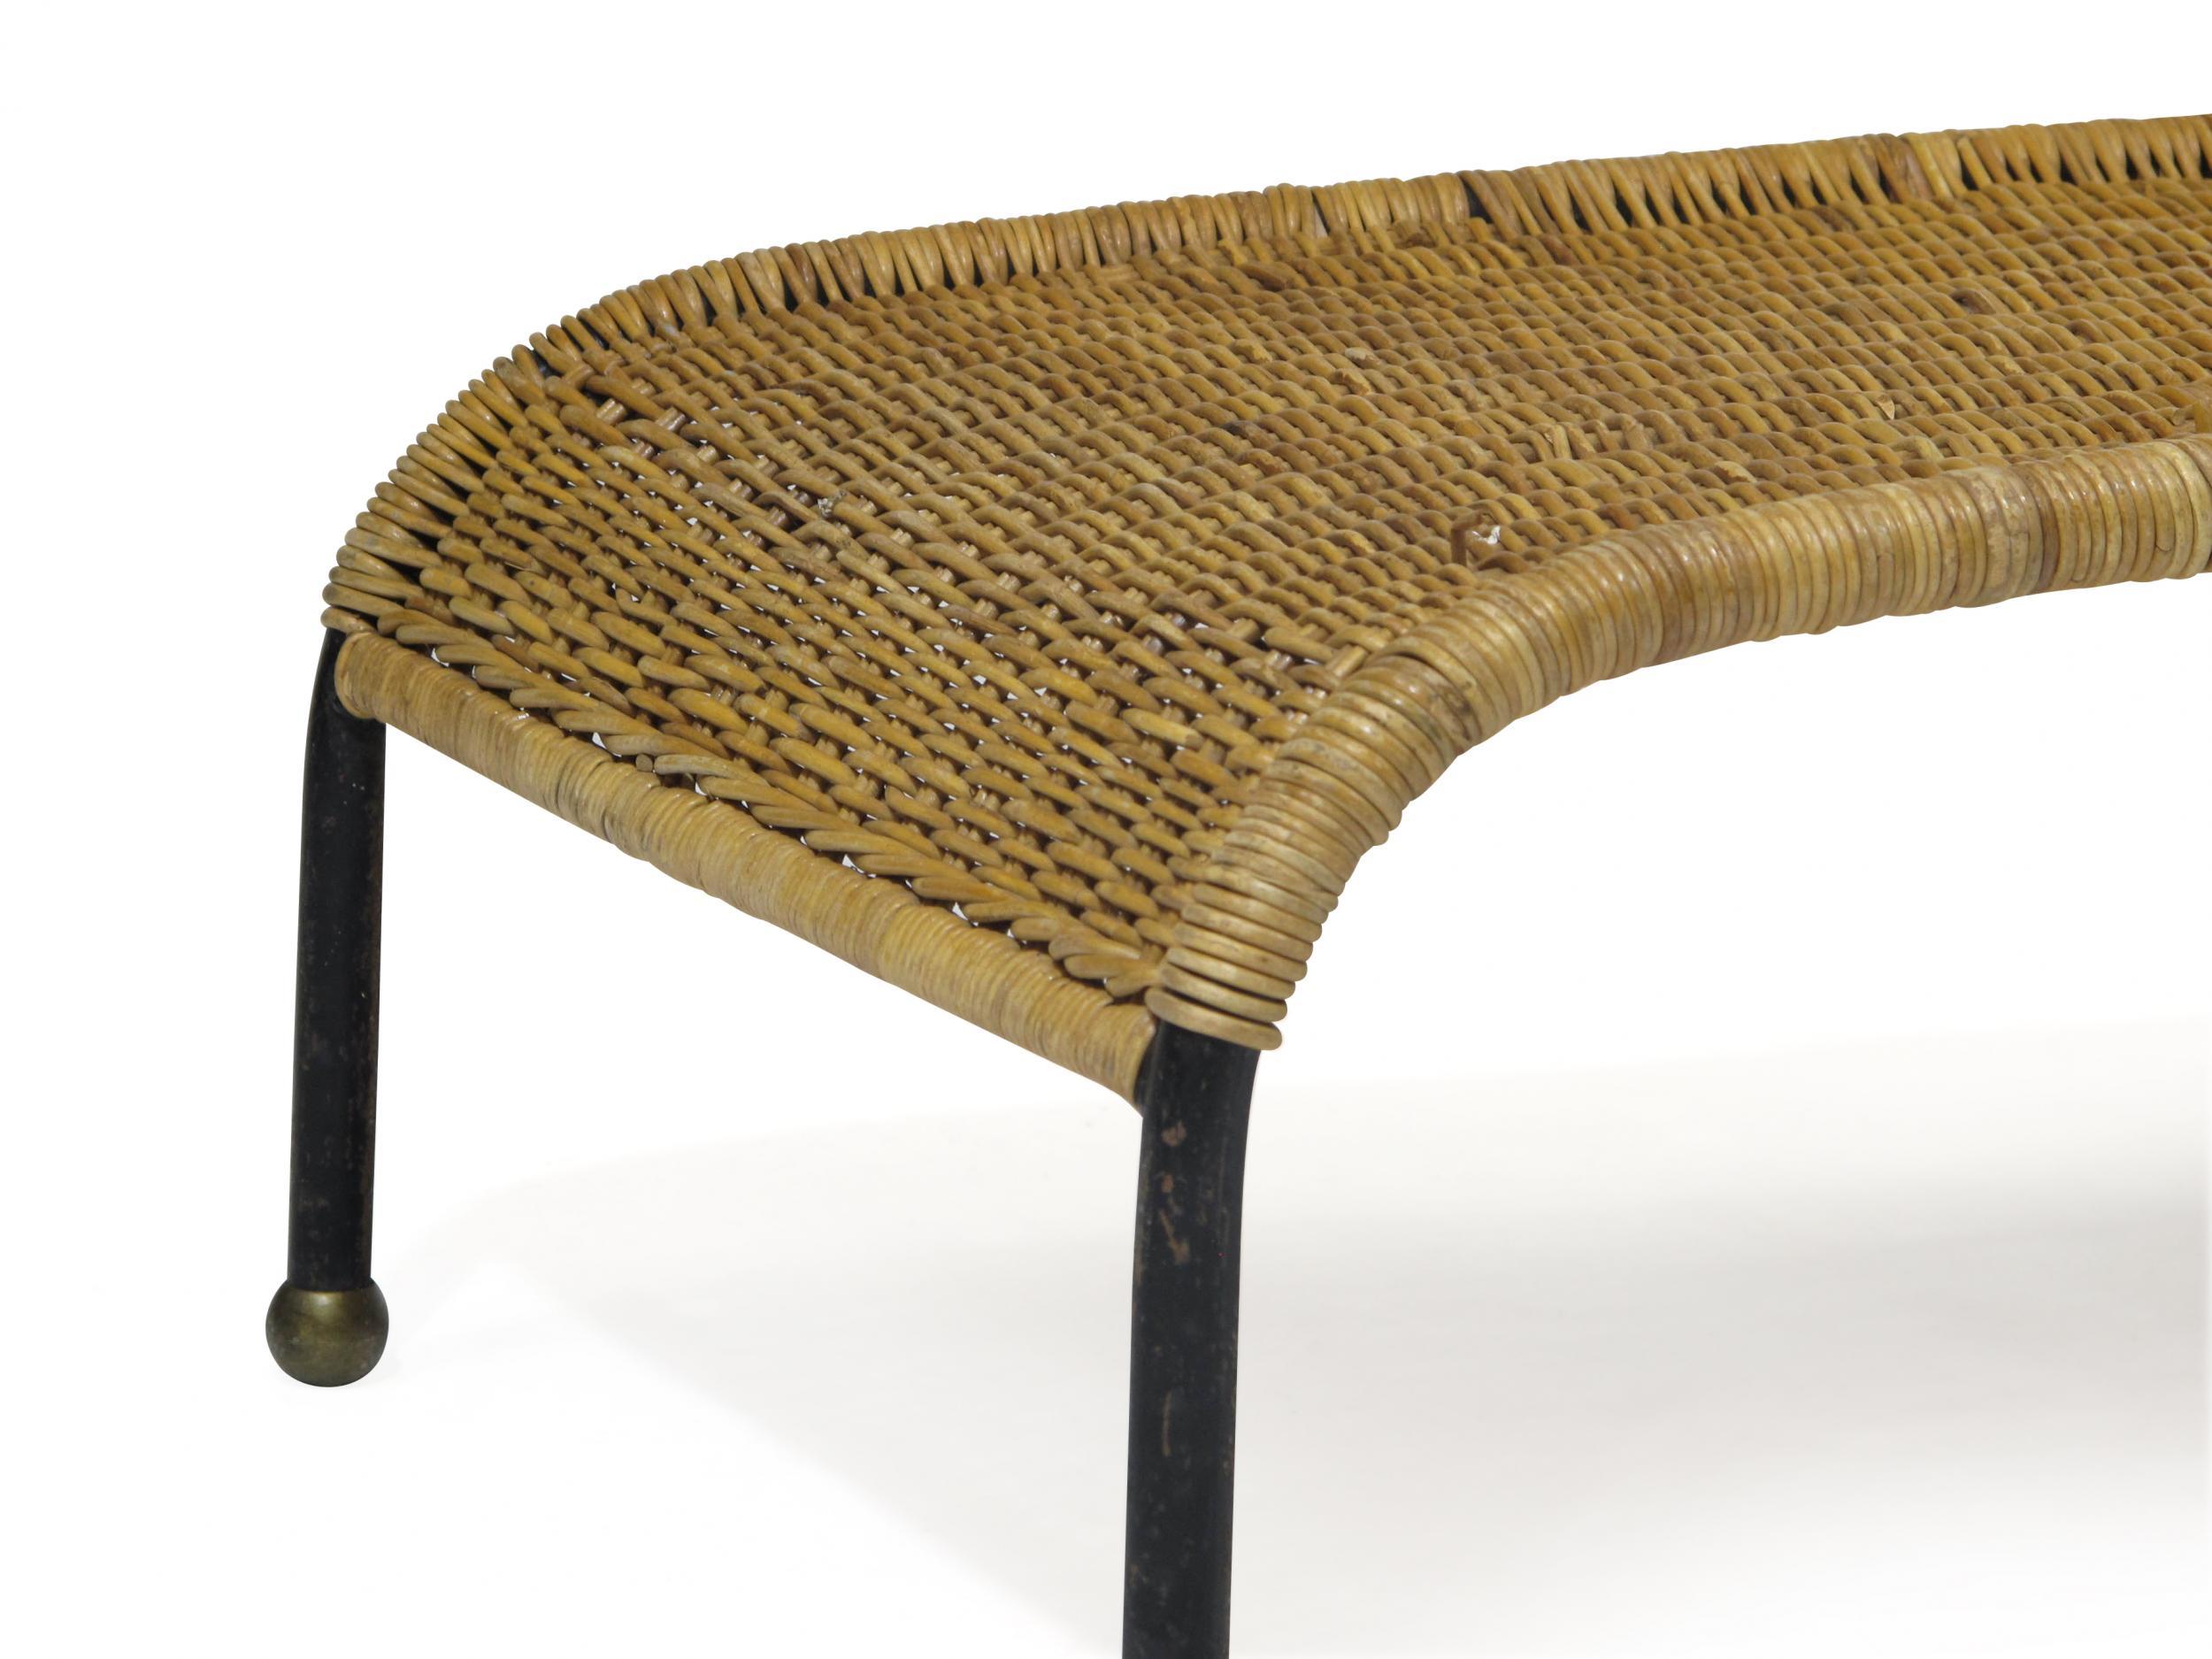 Metal Midcentury Woven Wicker Chaise Lounge